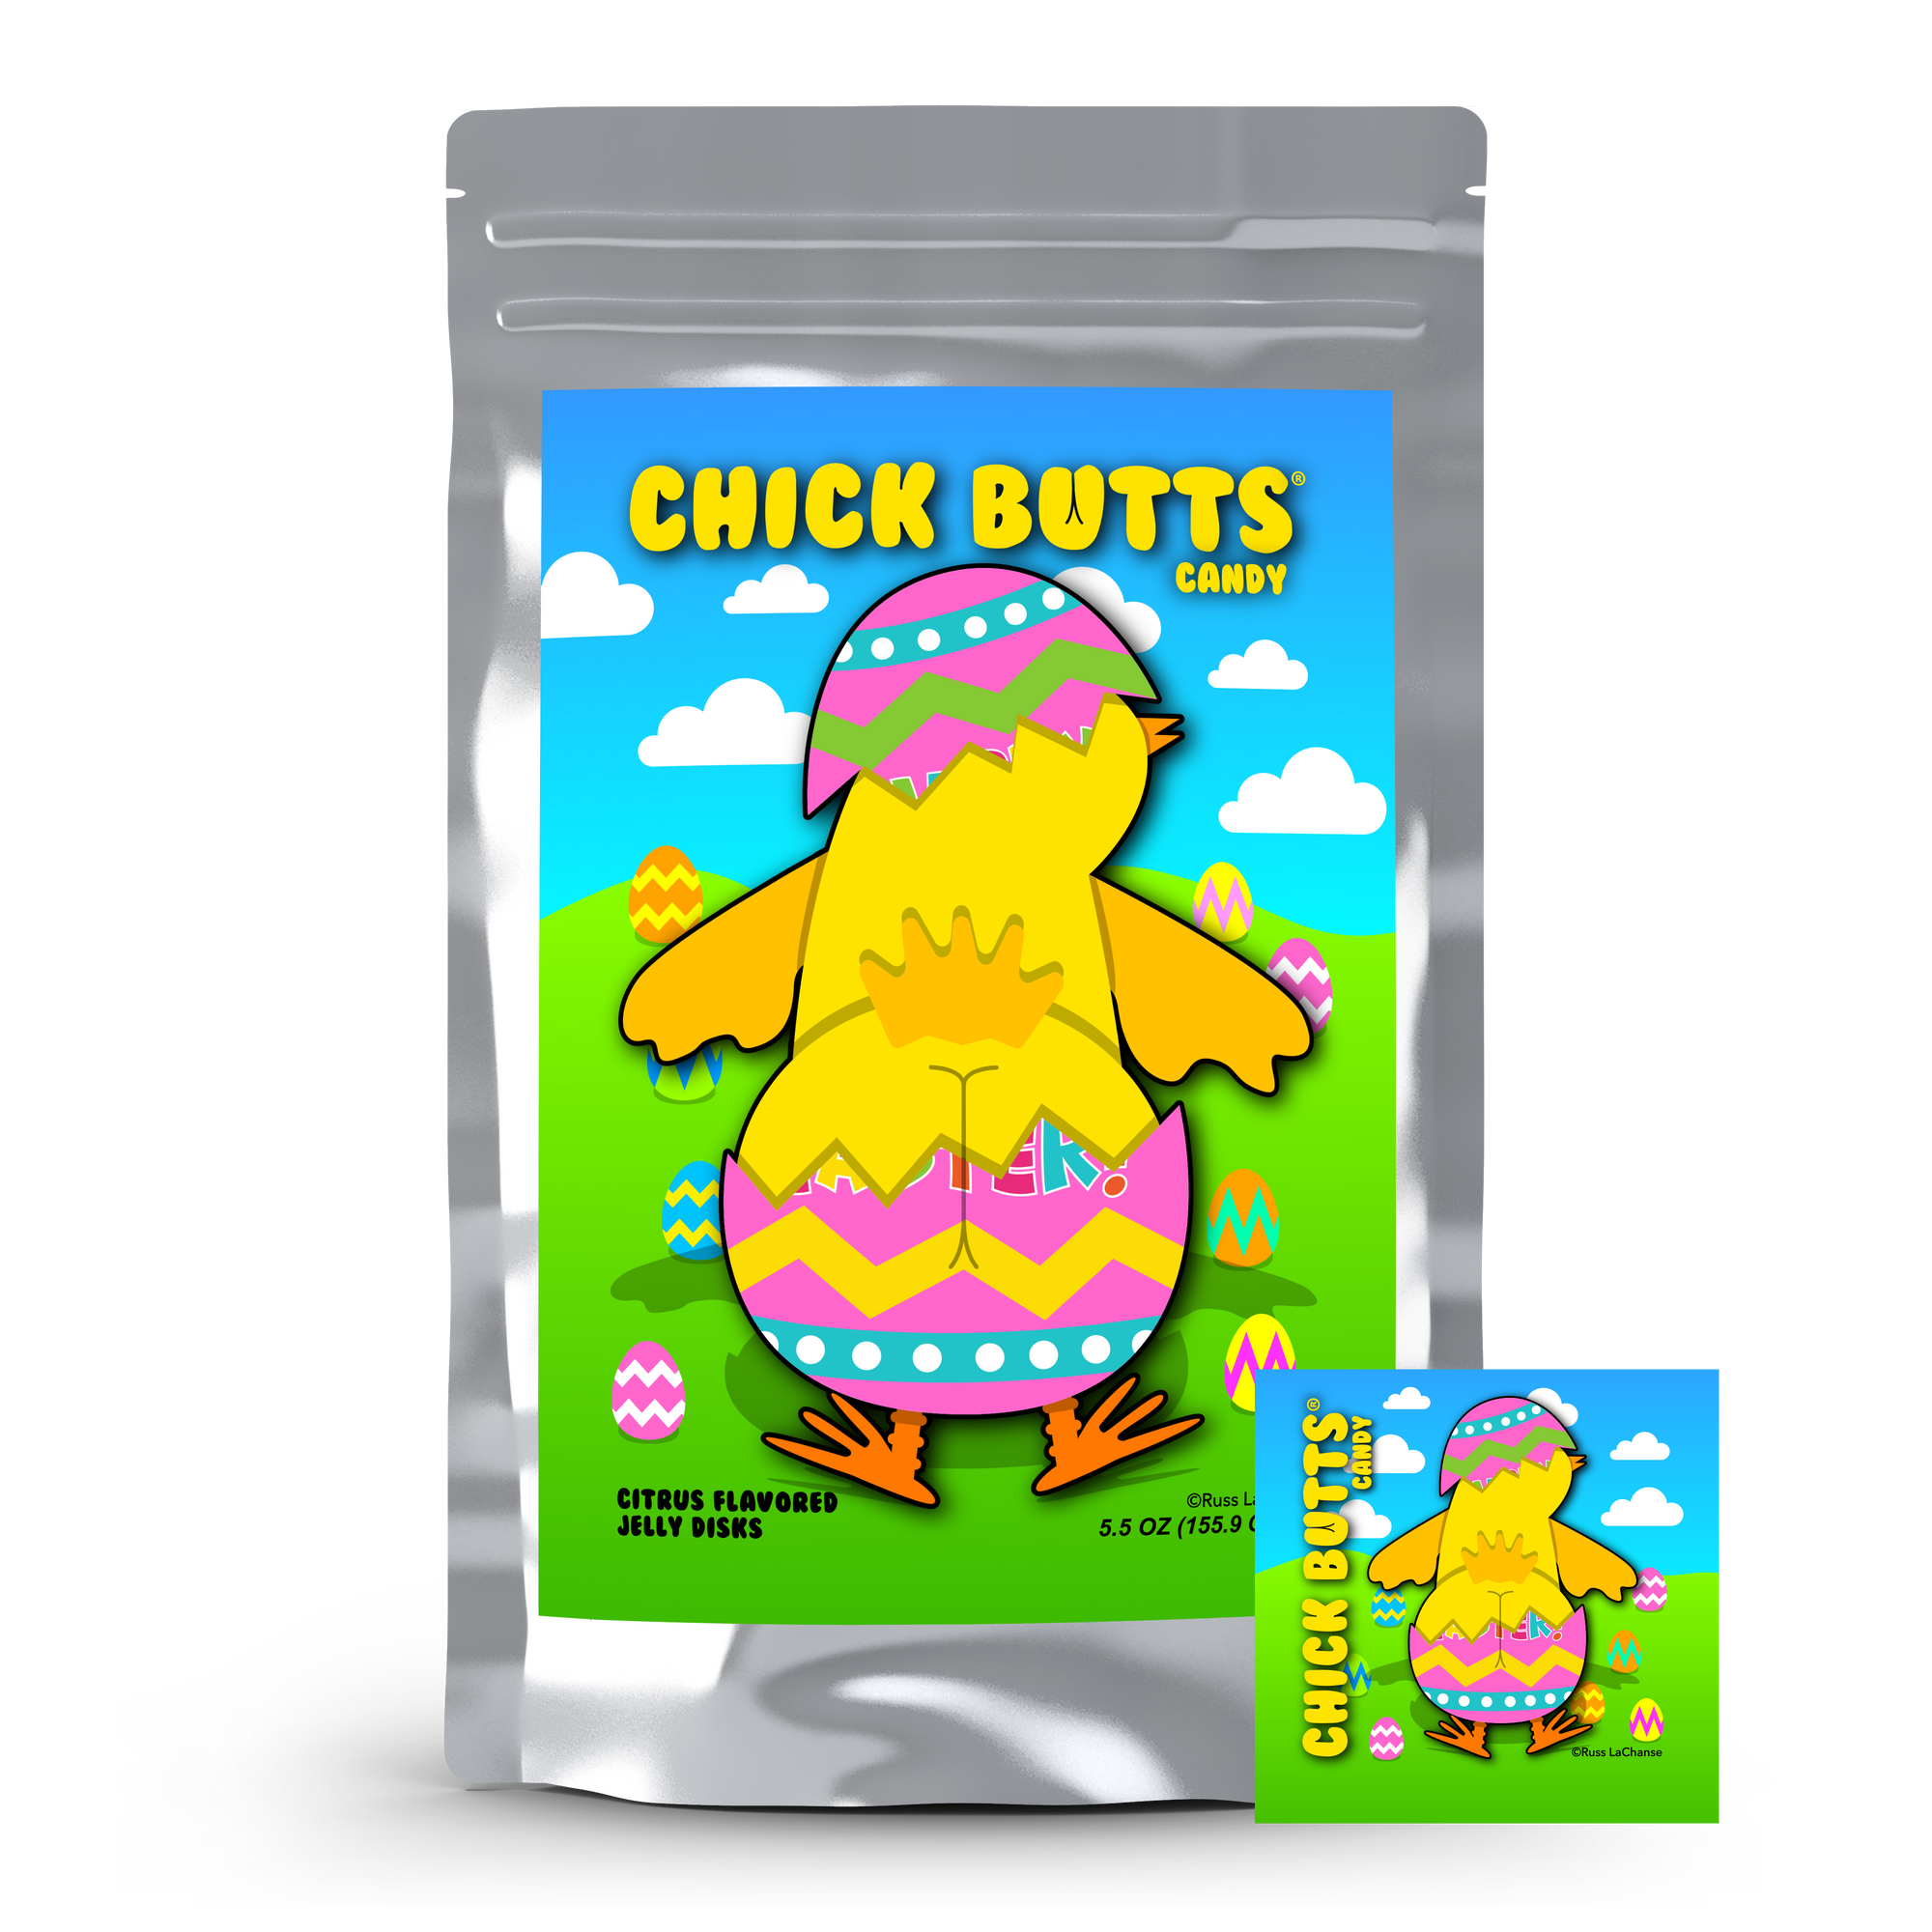 Chick Butts